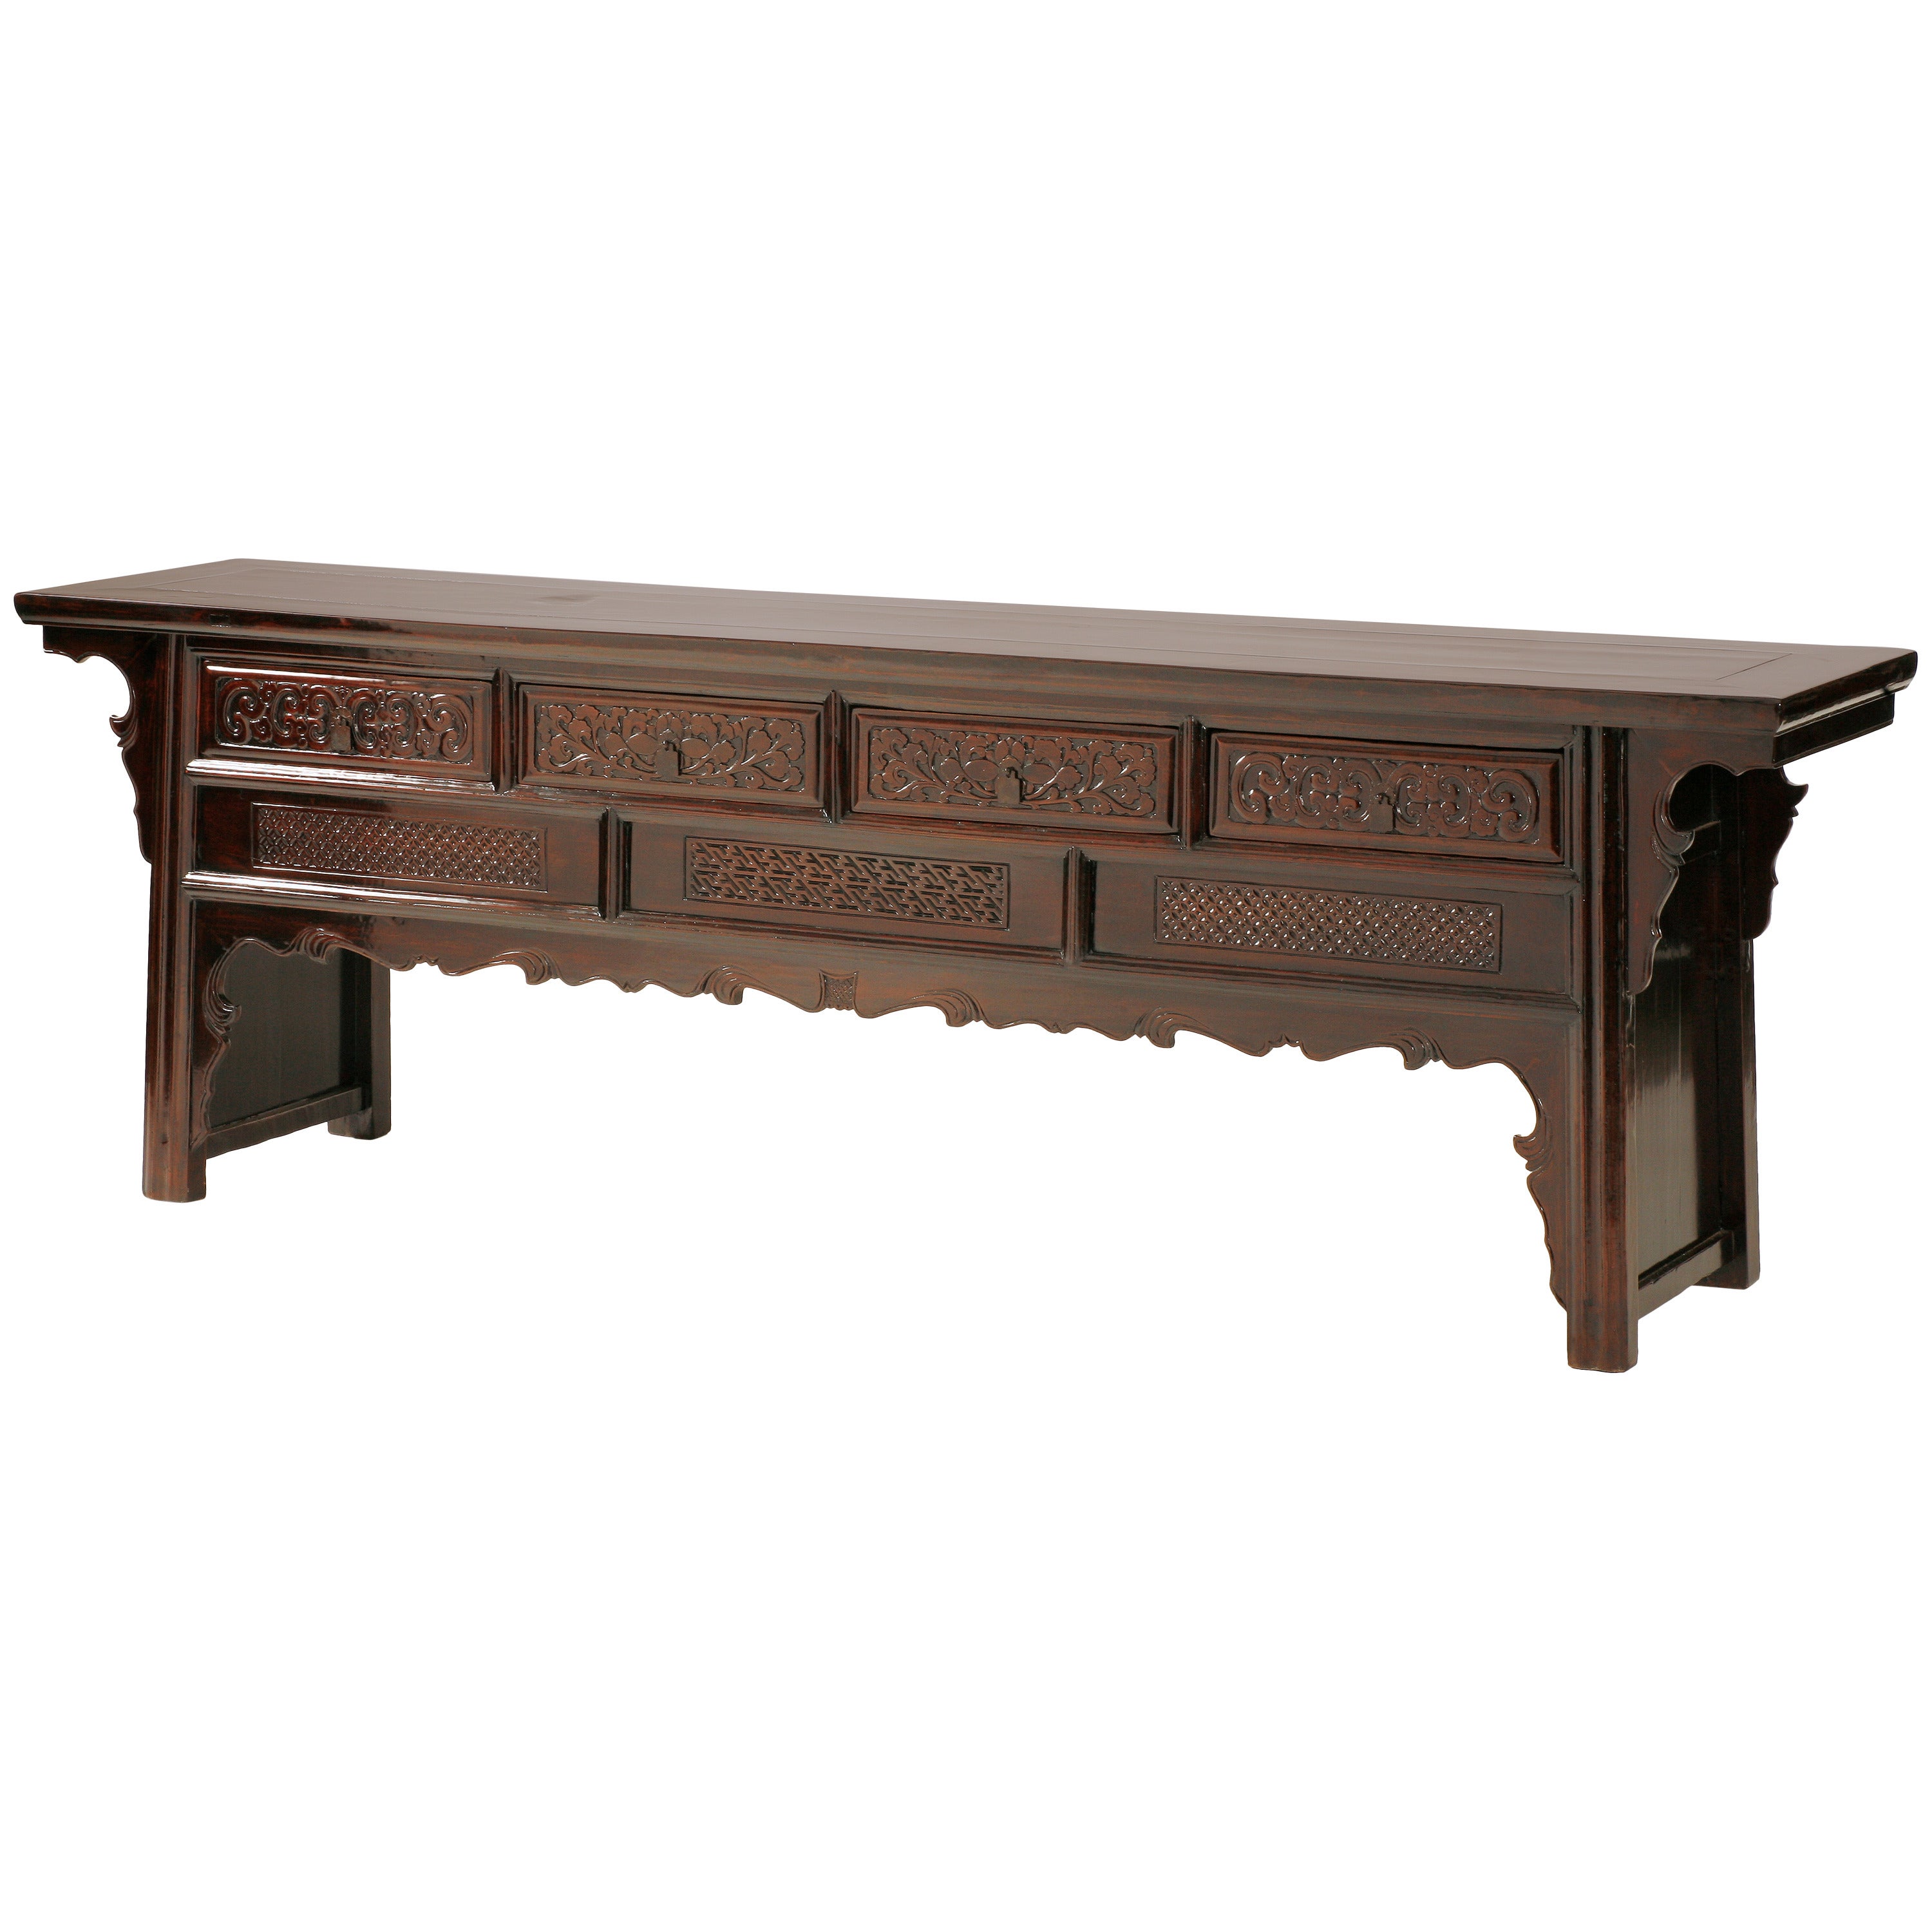 18th Century Chinese Walnut Altar Table or Raised Coffer with Relief-Carving